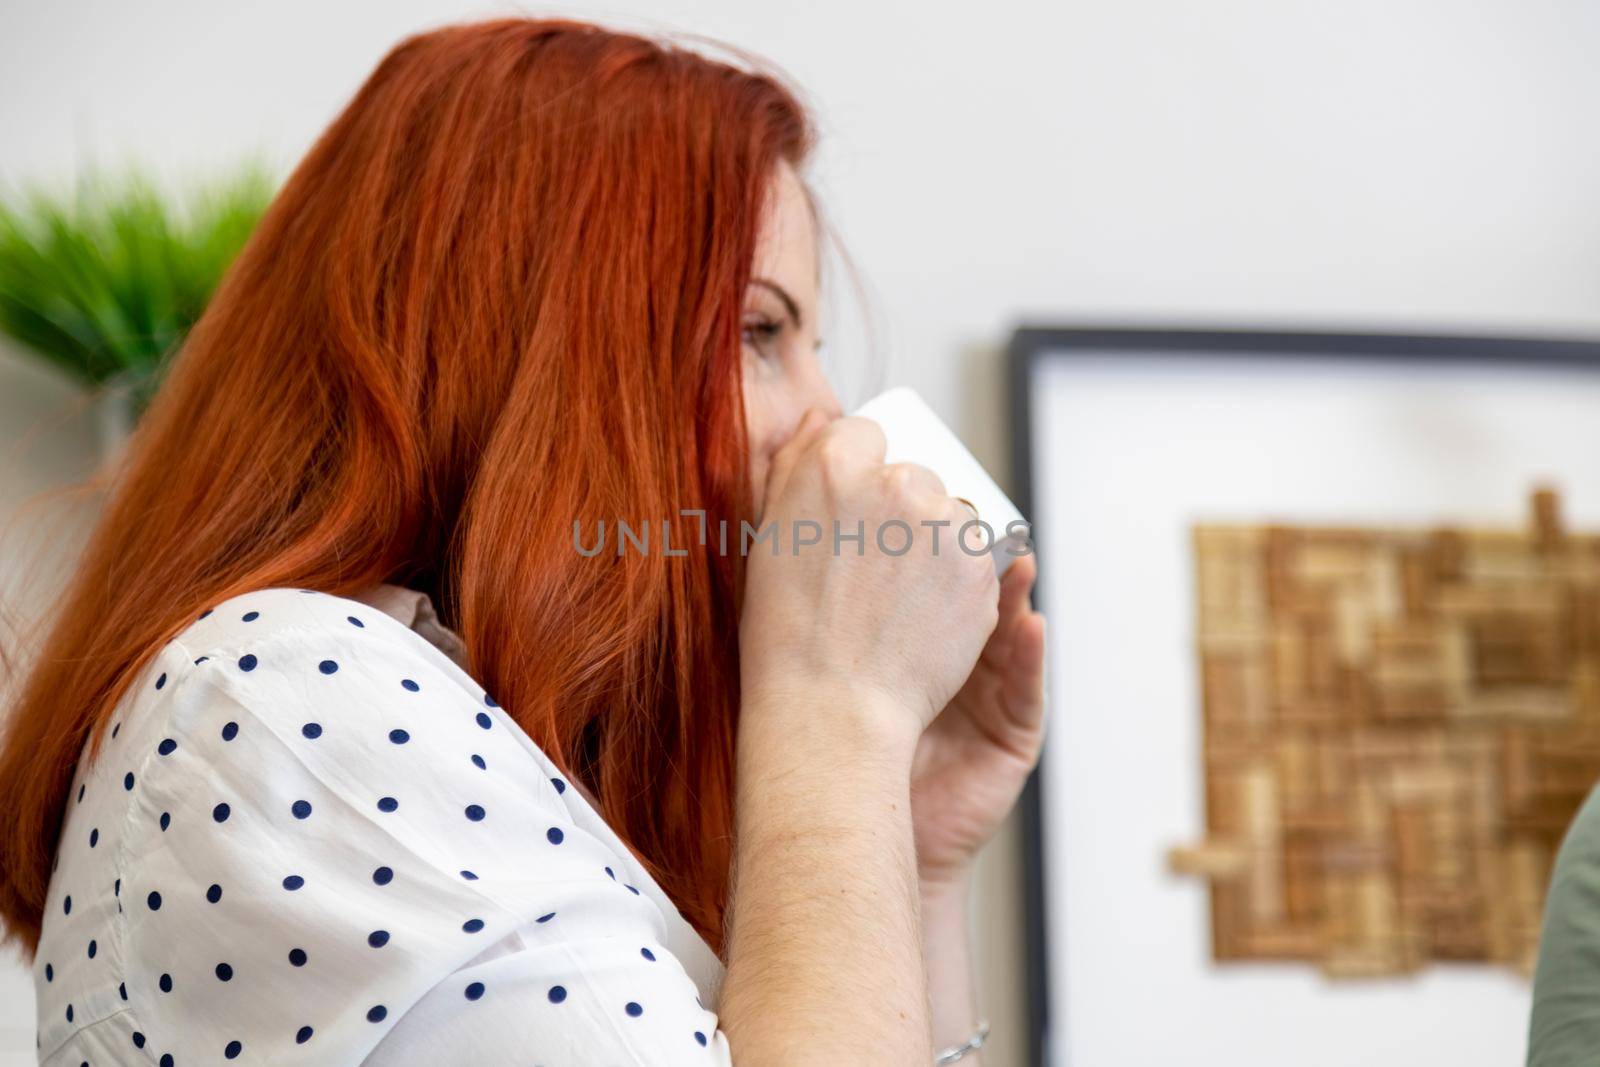 portrait of red-haired woman enjoys drinking coffee from a white cup in cafe. side view close up